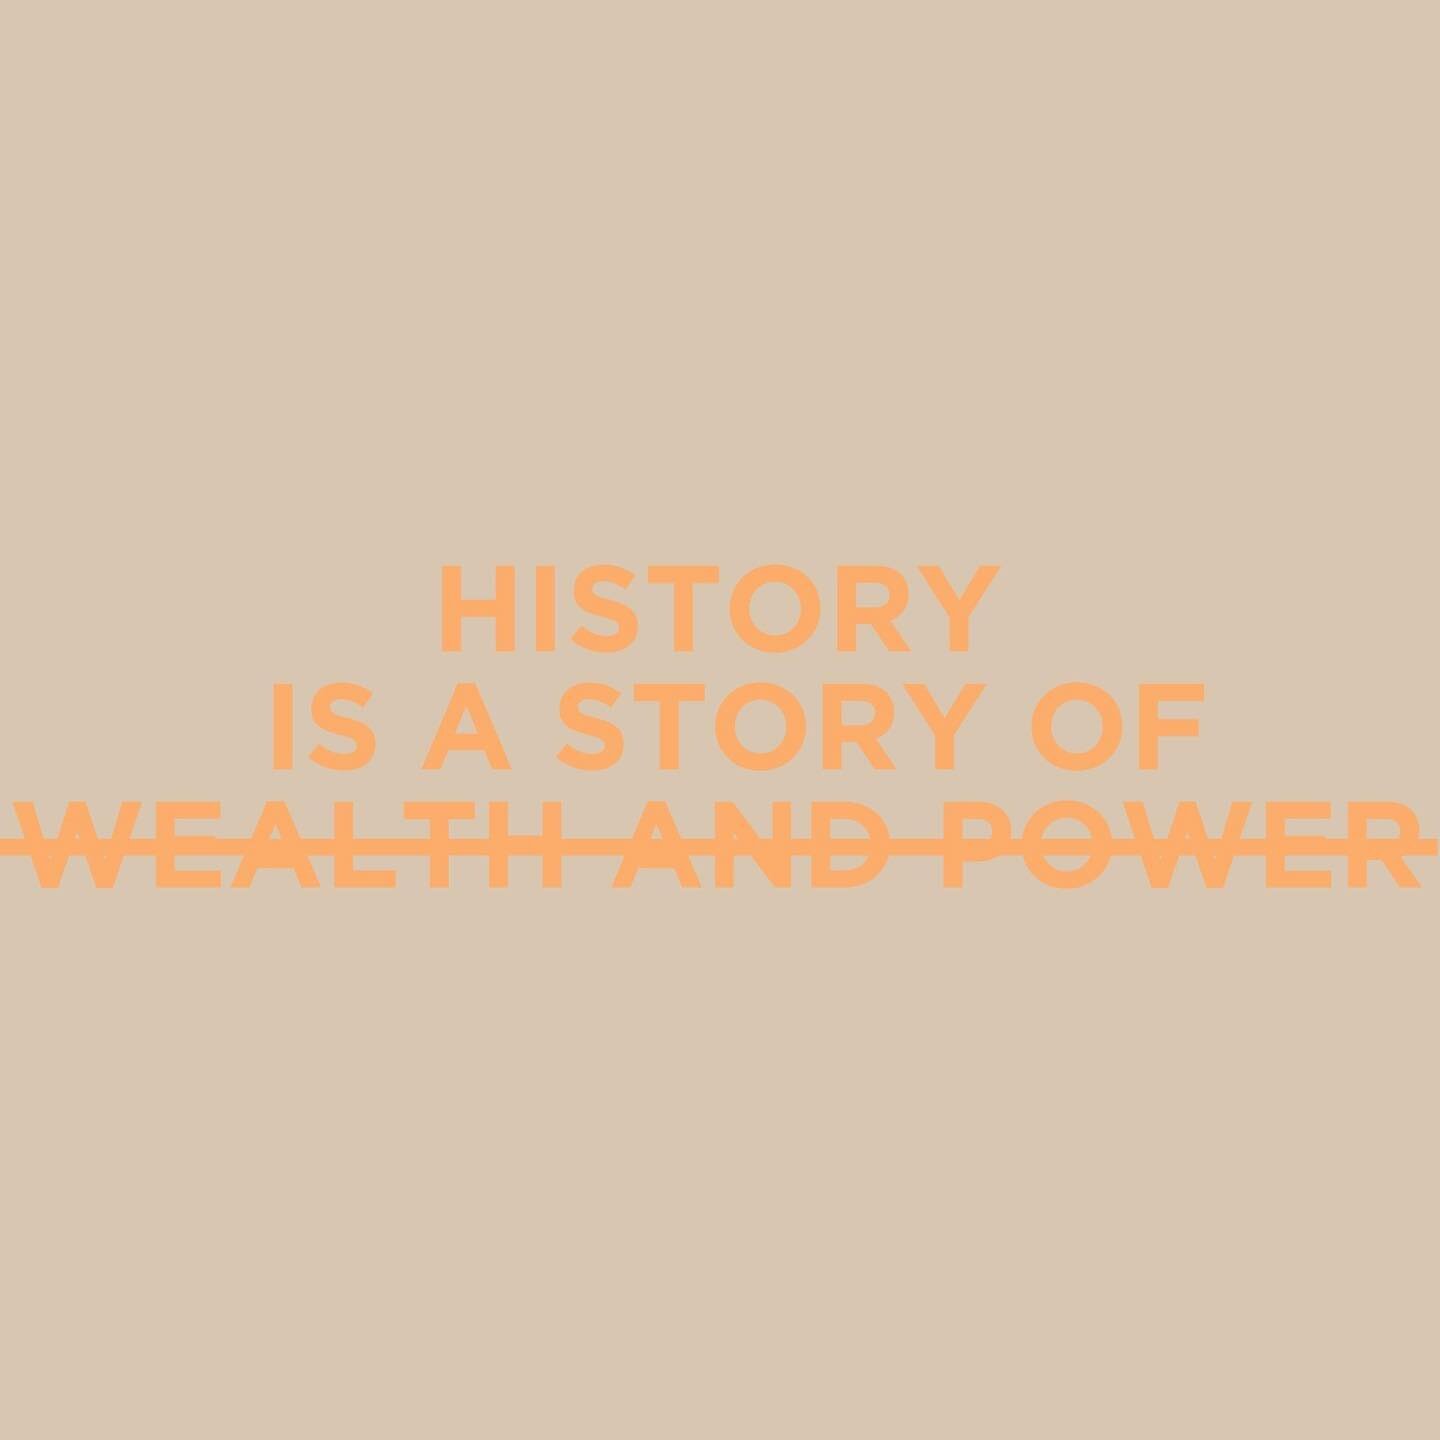 How would you redefine &ldquo;history?&rdquo; Answer this question and more in the interactive sections of our latest print issue, The Edit.